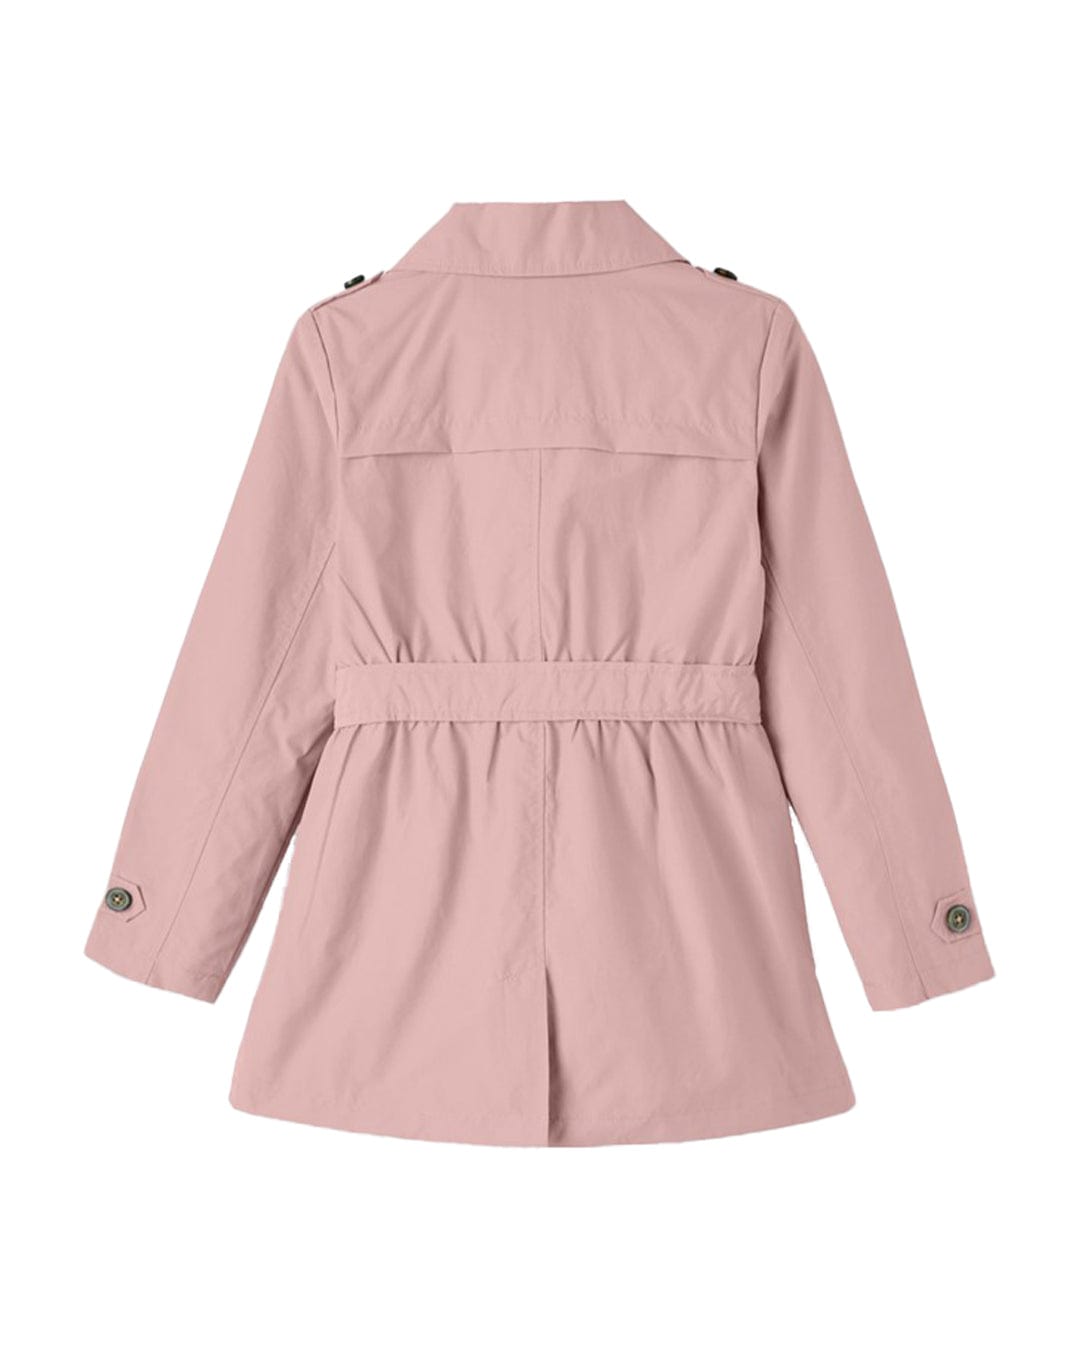 Name It Outerwear Name It Maiyo Pink Trench Coat